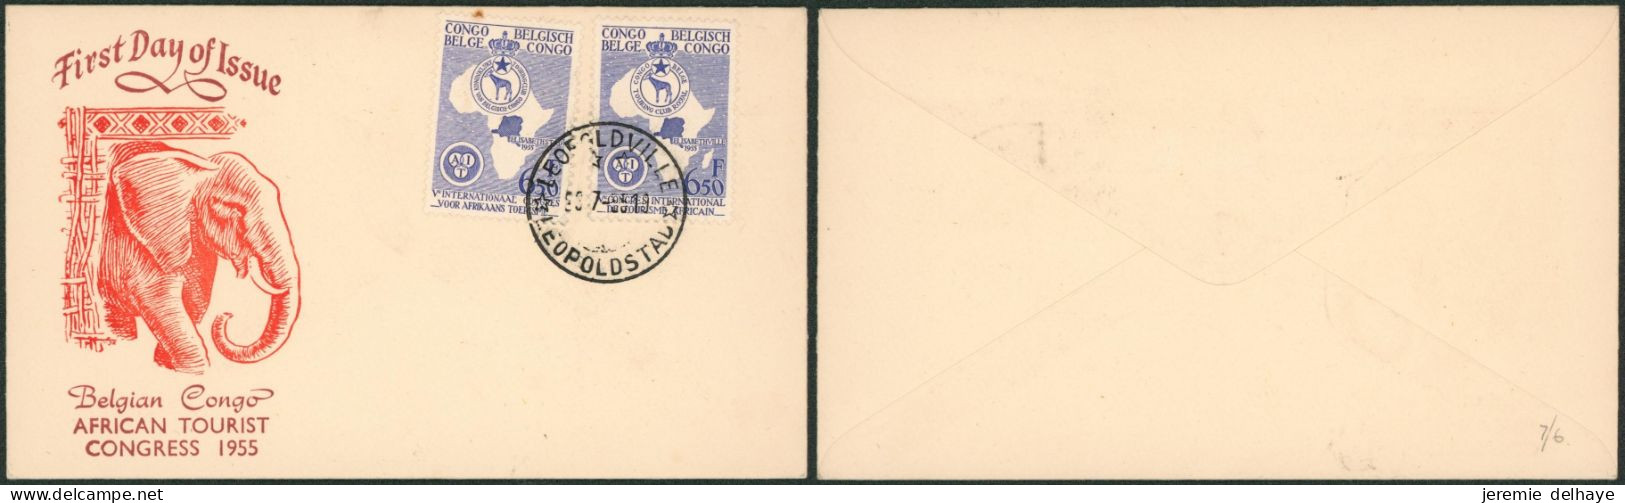 Congo Belge - N°337/38 First Day Of Issue (FDC, African Tourist Congress 1955) - Lettres & Documents